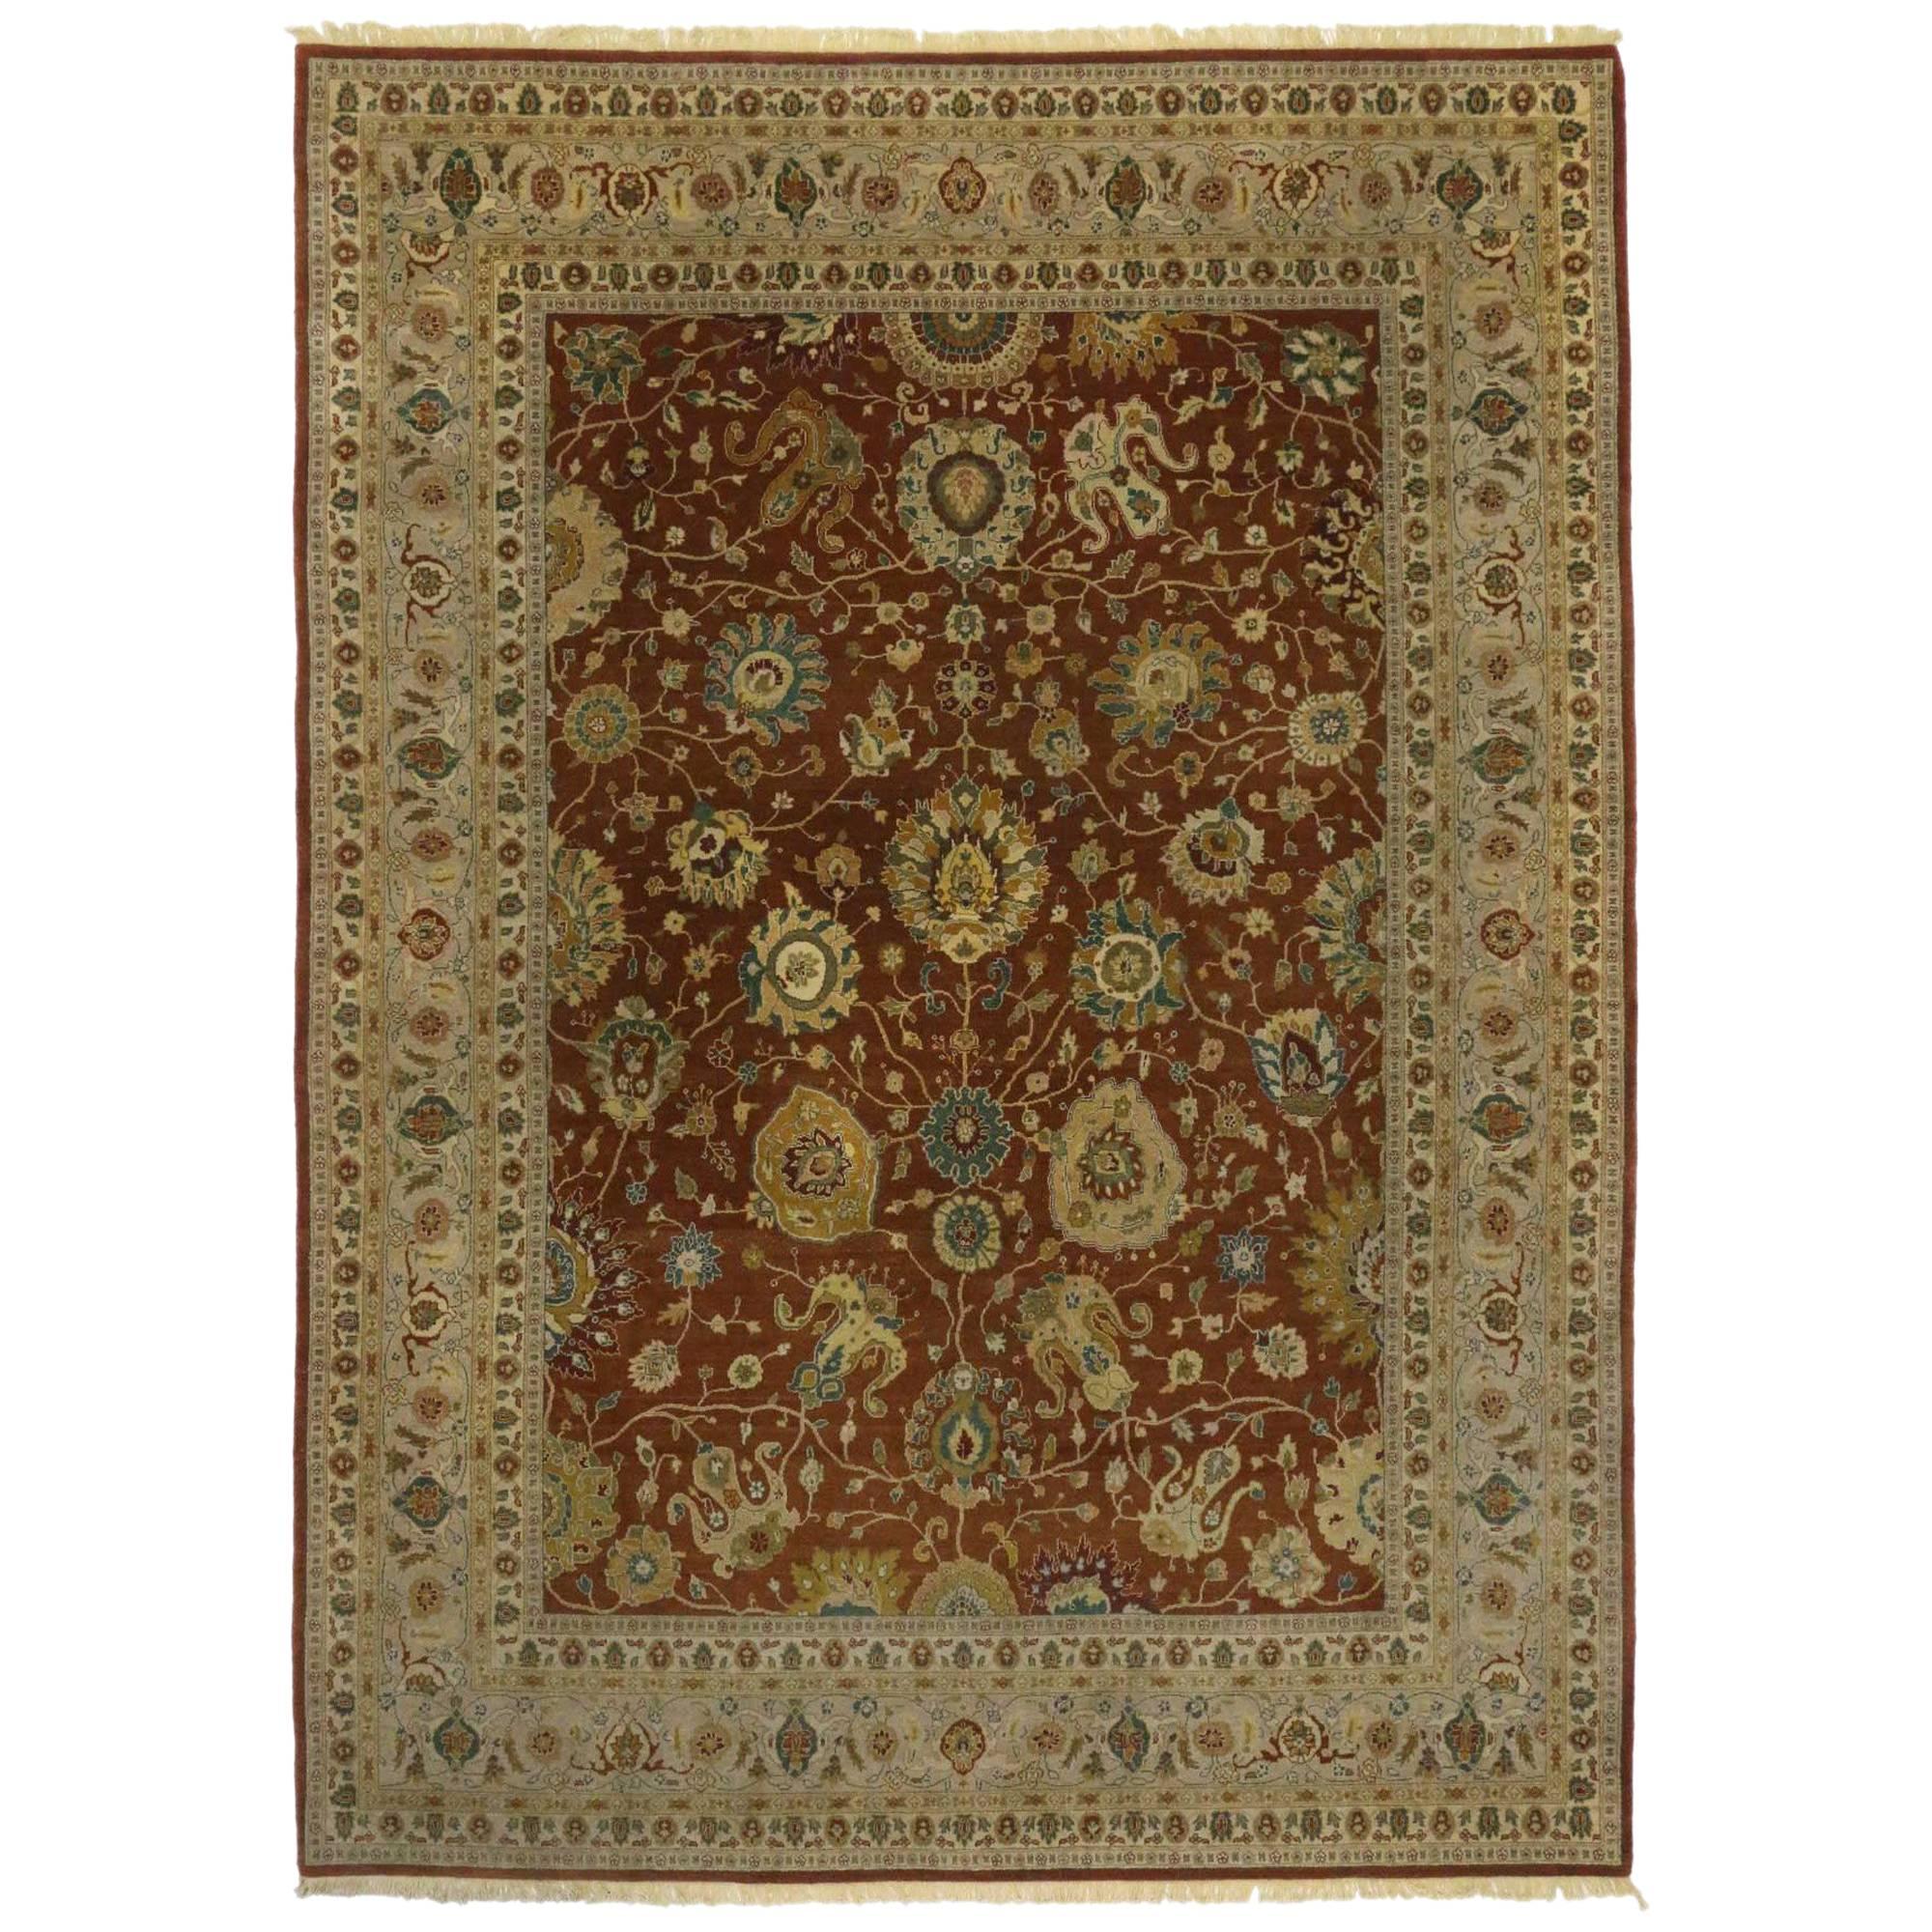 Vintage Indian Rug with Traditional Style and All-Over Floral Design